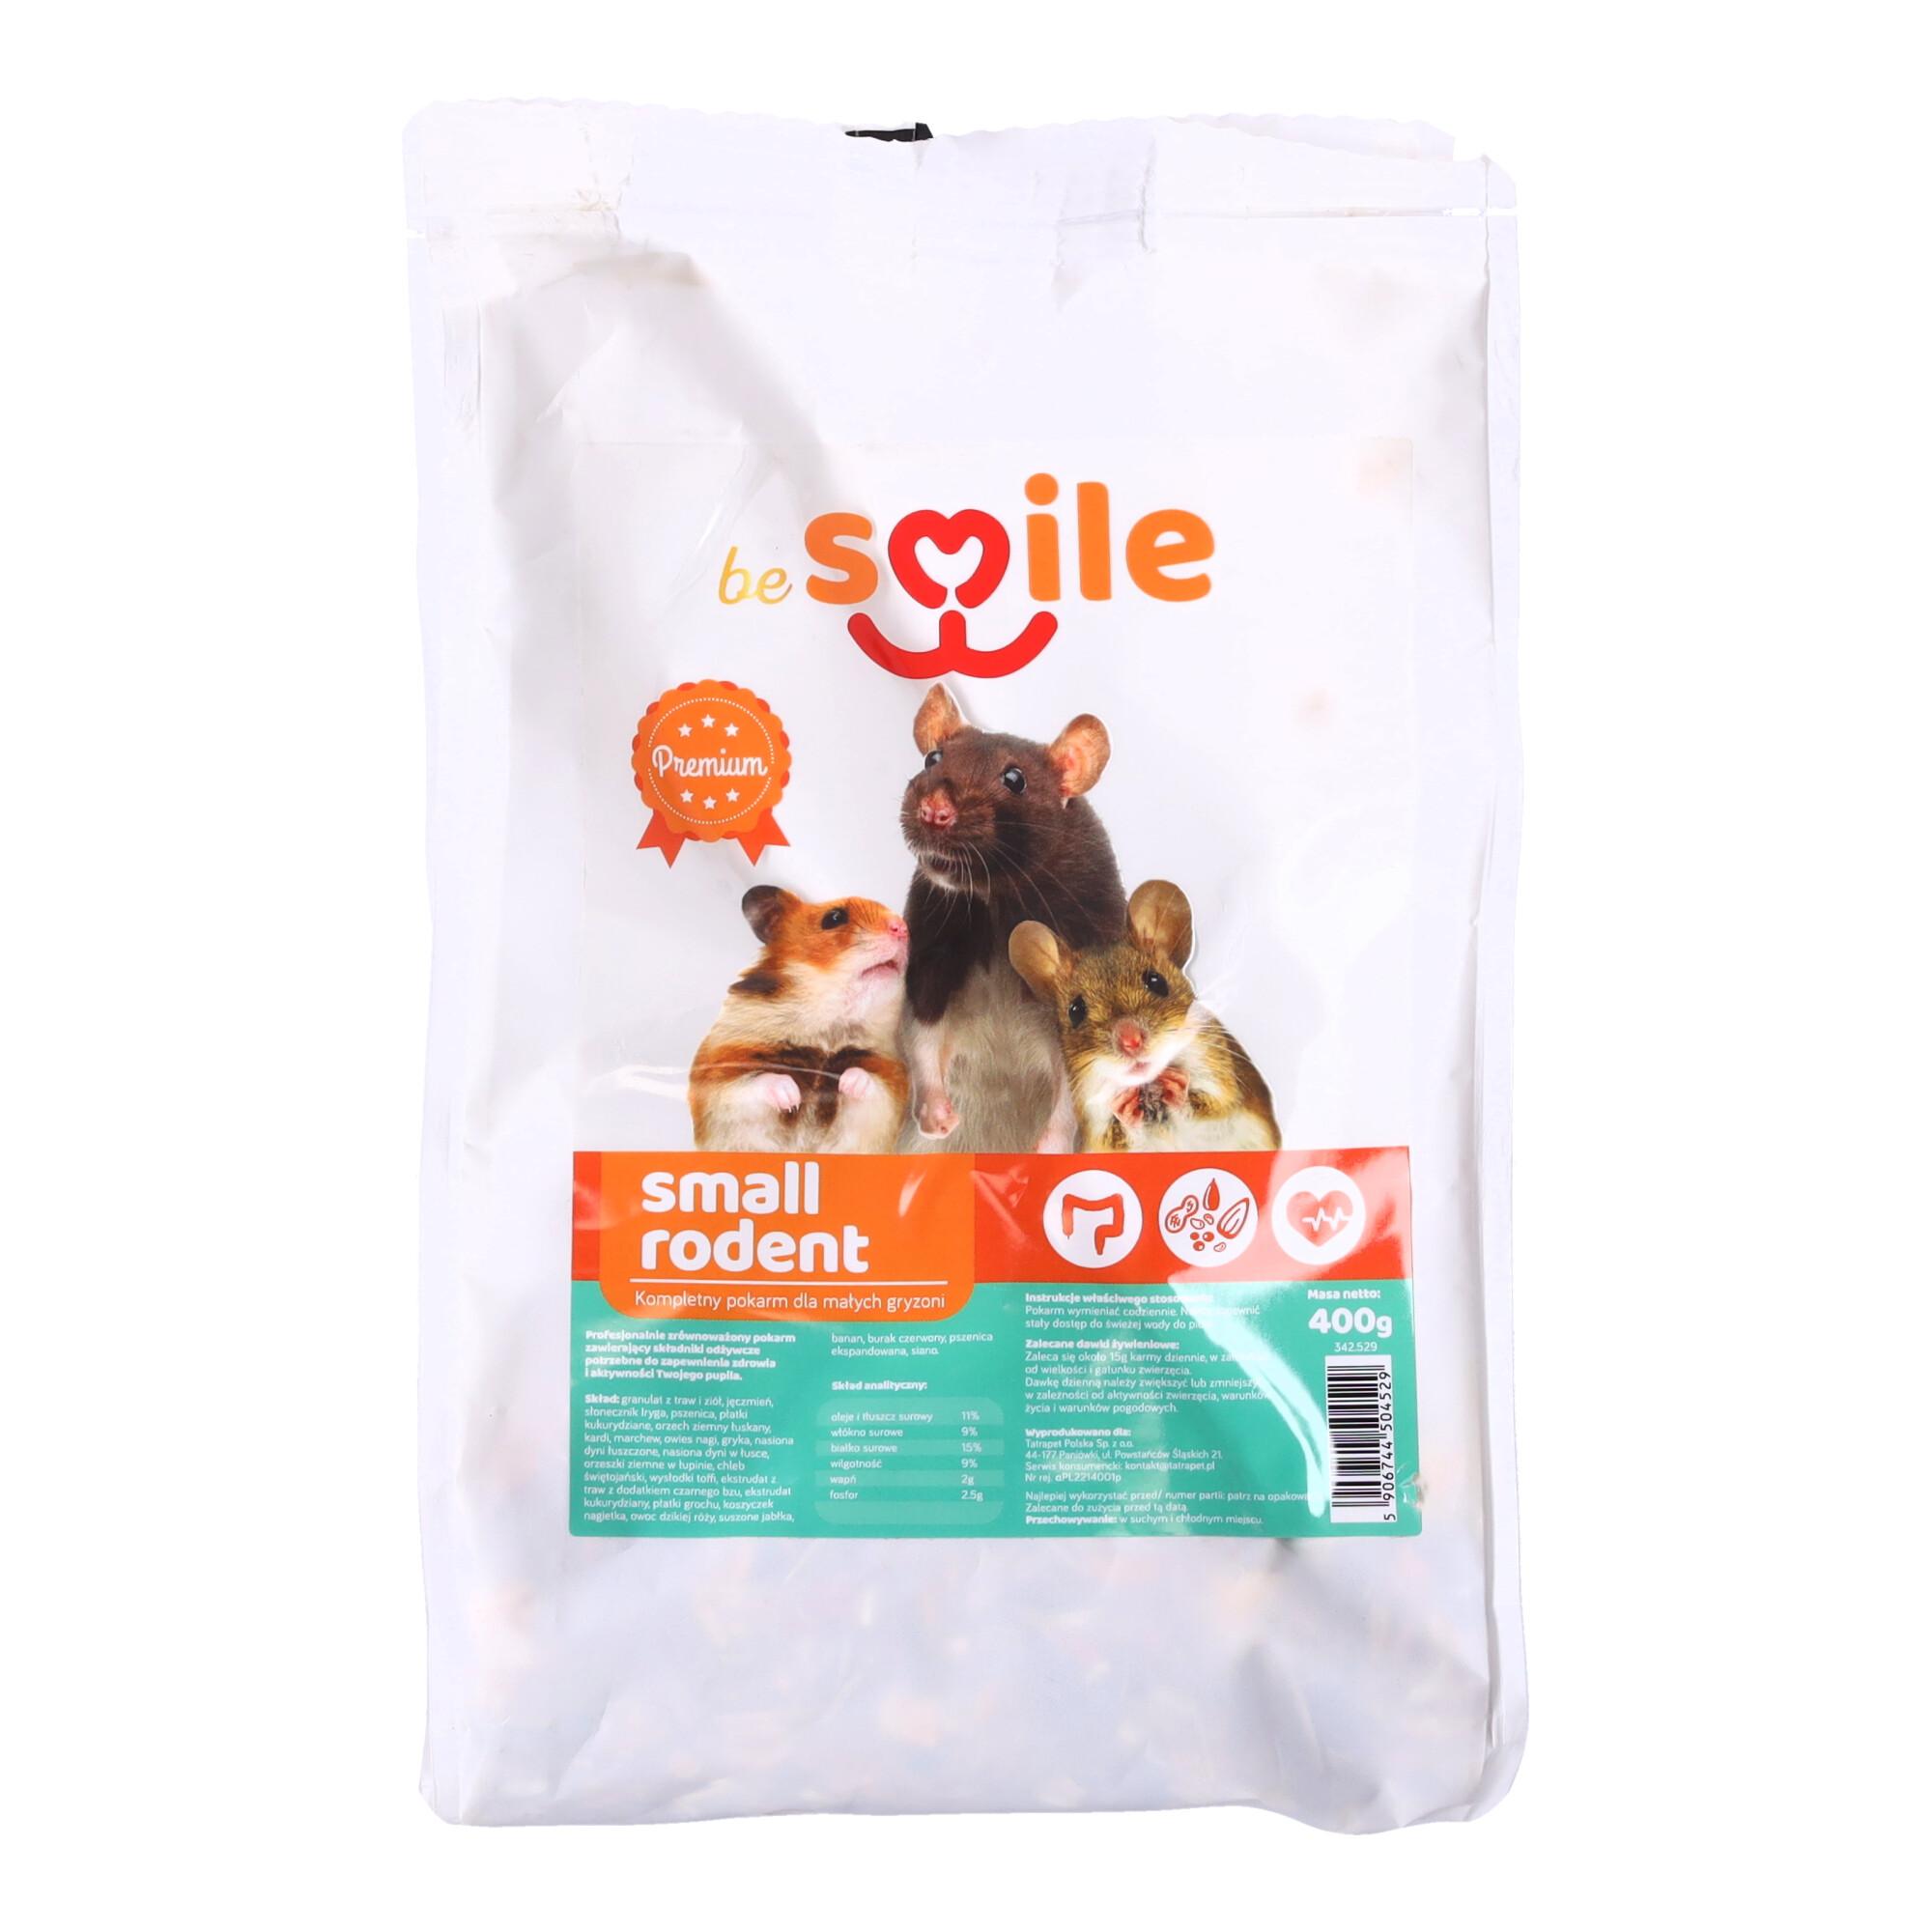 beSMILE RODENT - Small Rodent 400g food for small rodents